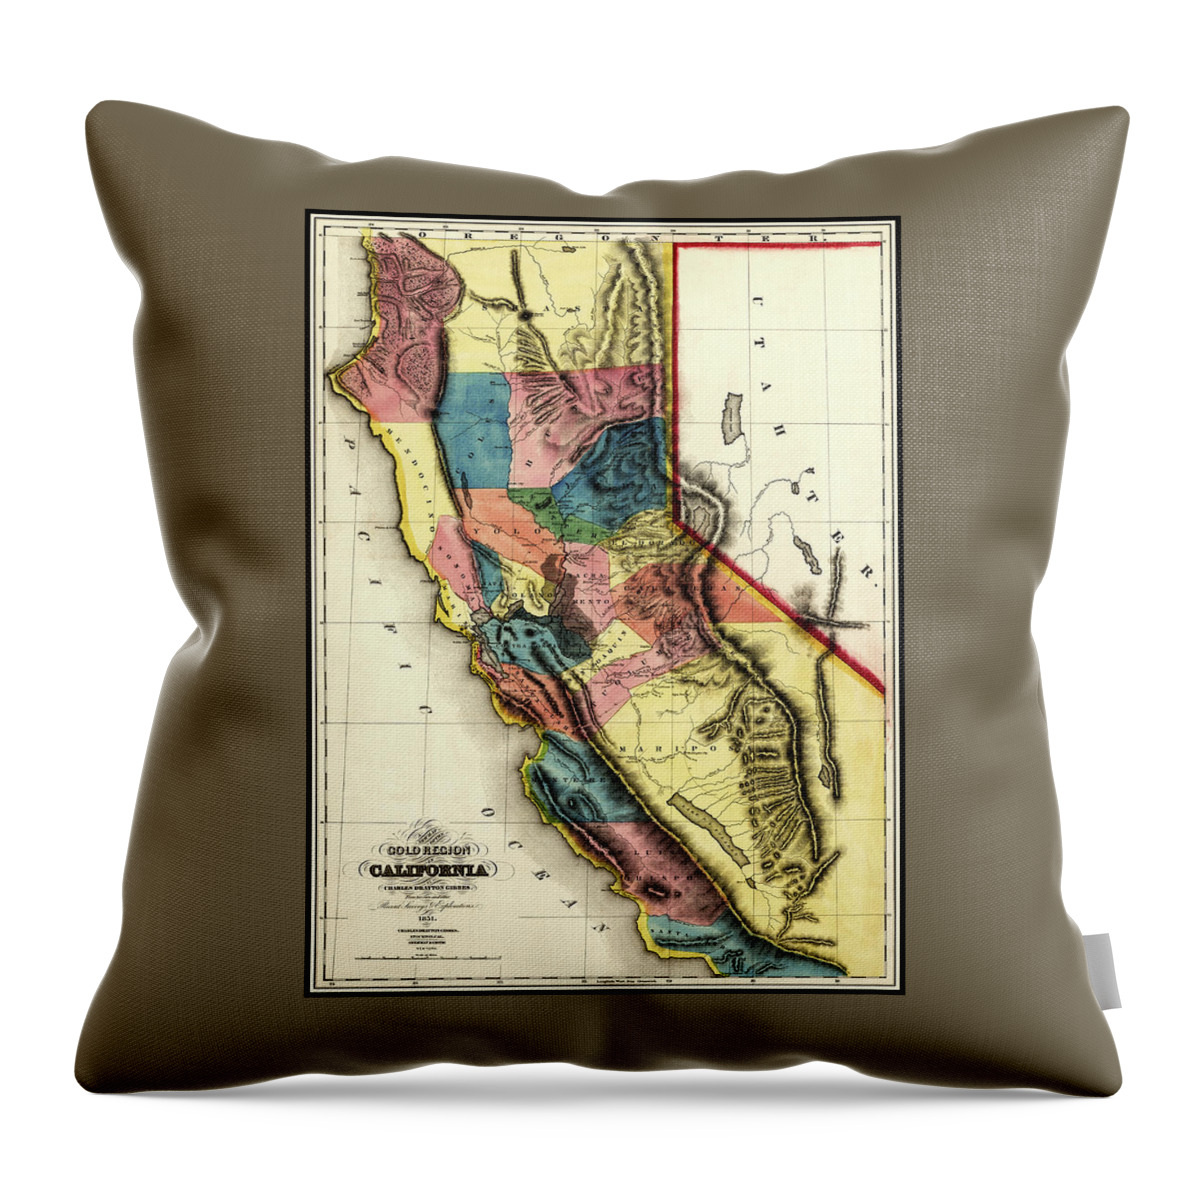 California Throw Pillow featuring the photograph California Gold Region Vintage Map 1851 by Carol Japp